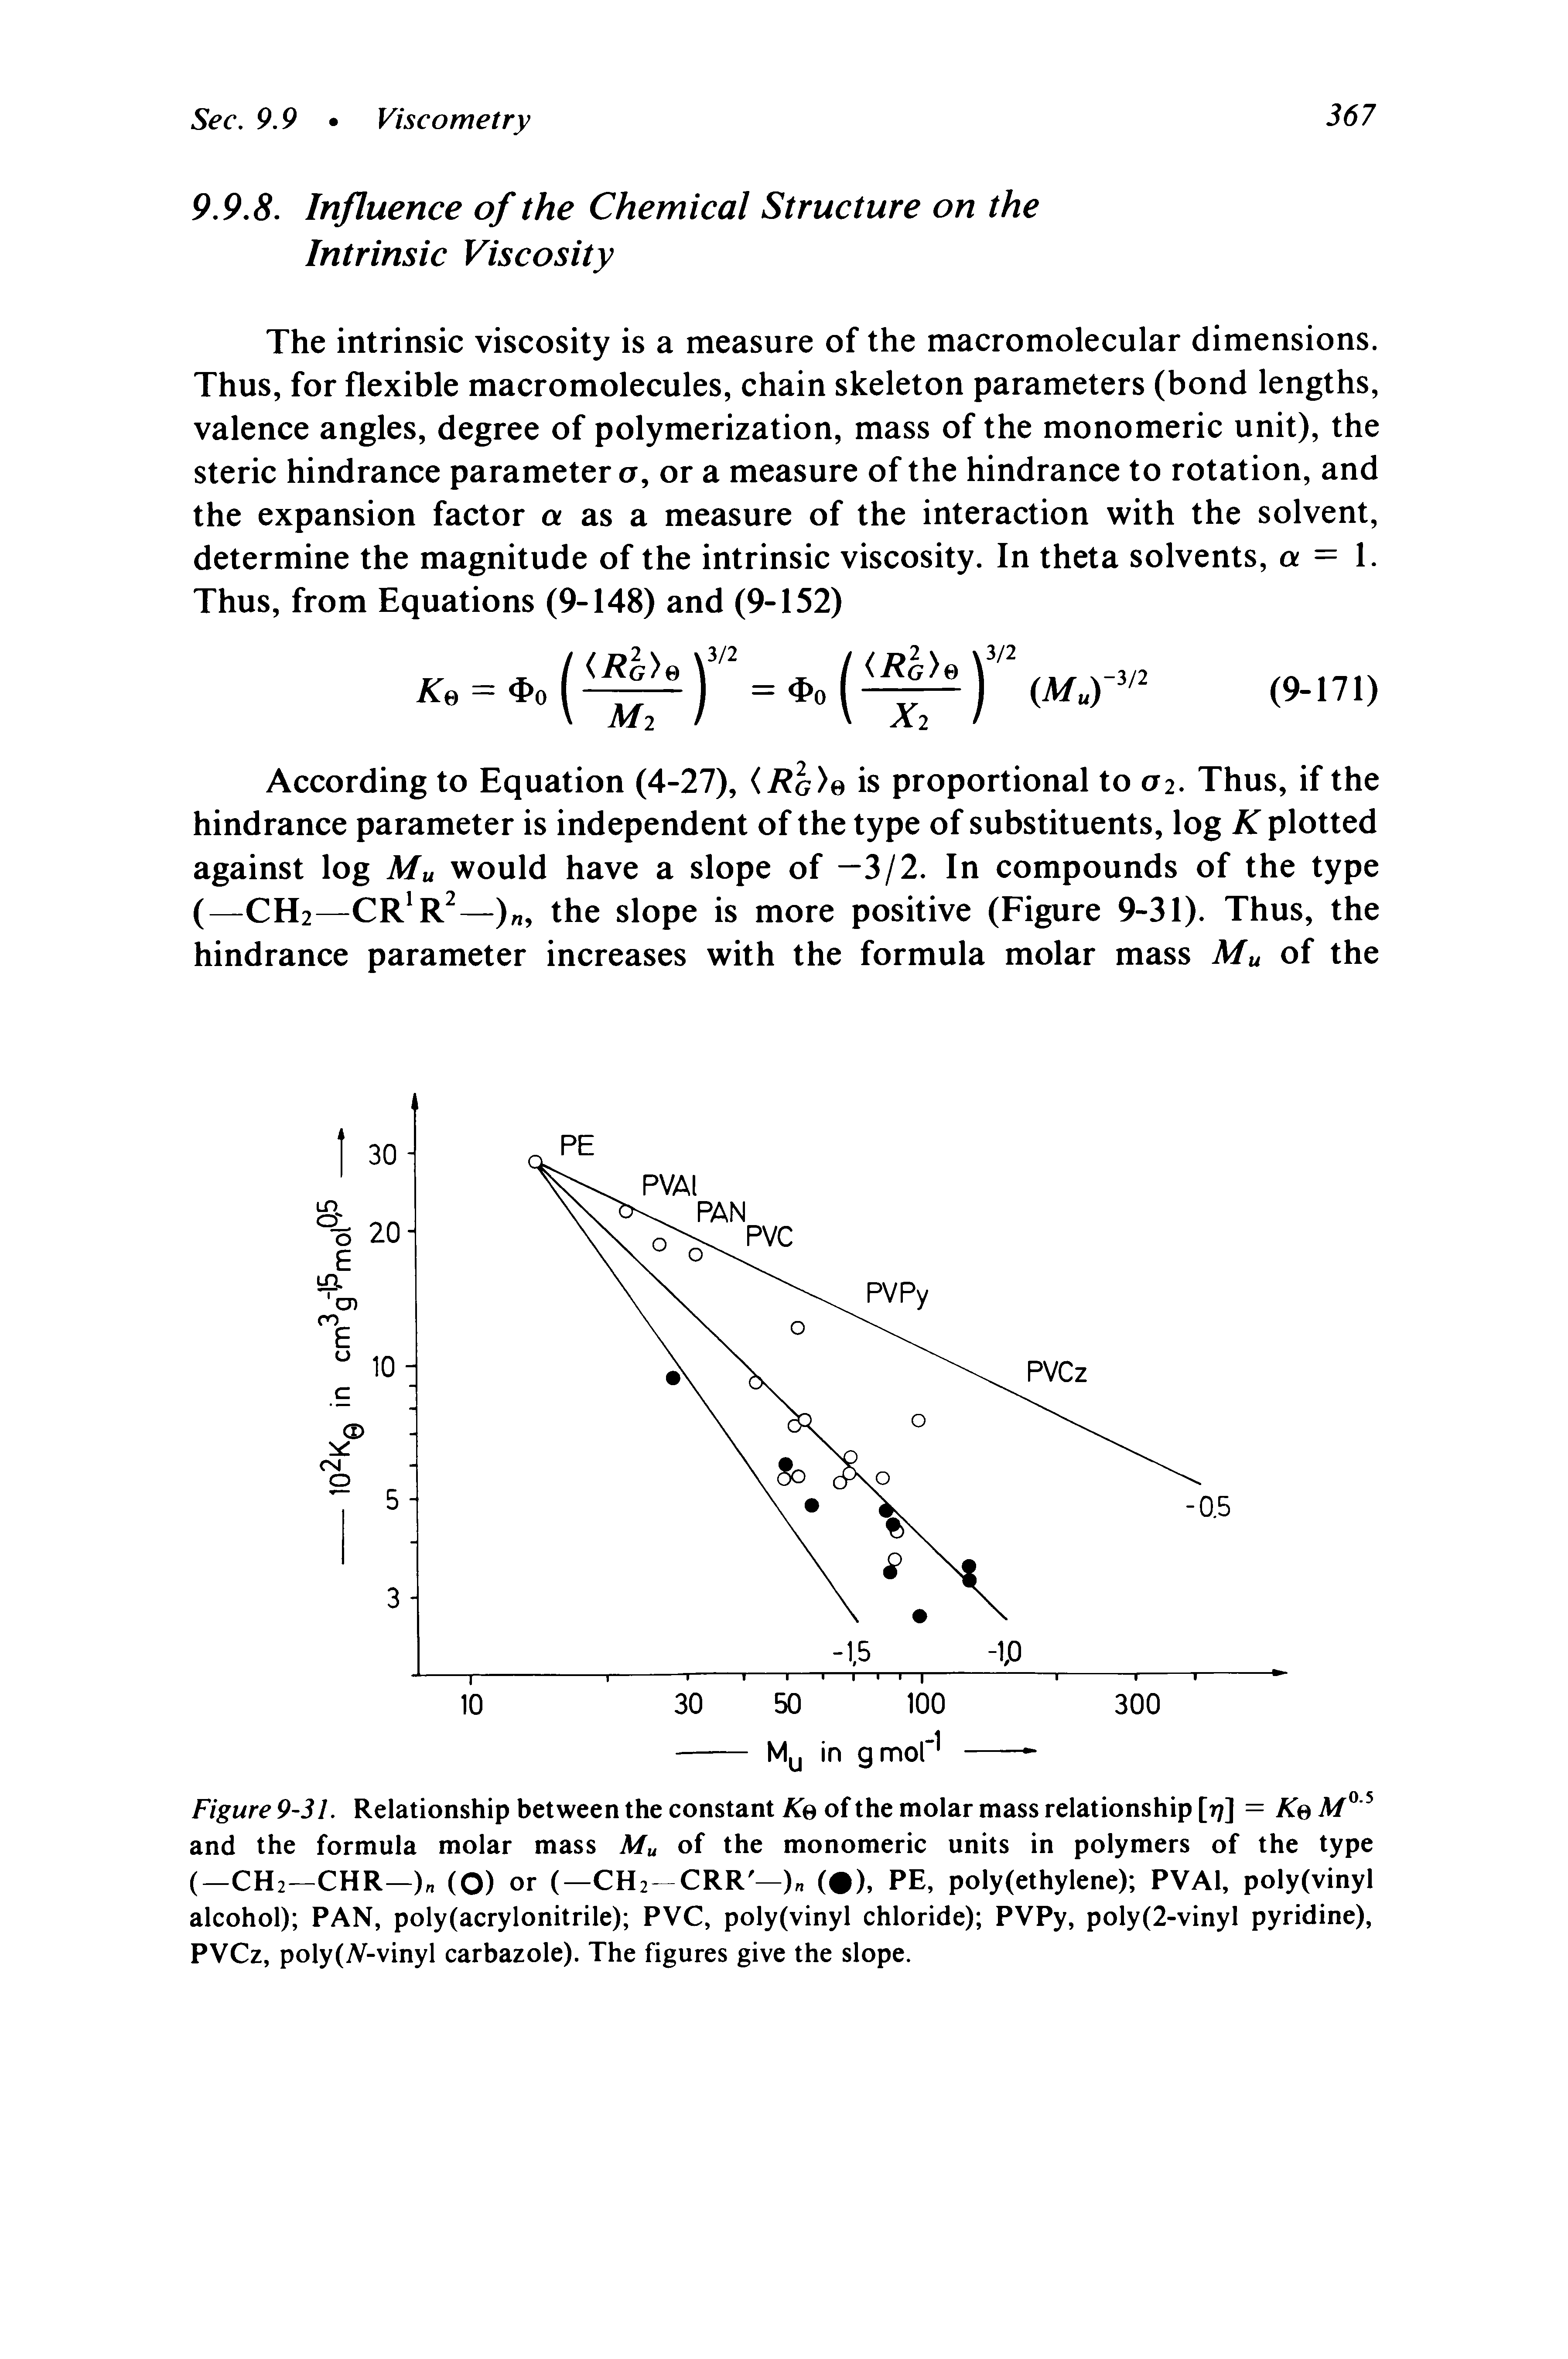 Figure 9-31. Relationship between the constant Ke of the molar mass relationship [rj] = Ke and the formula molar mass Mu of the monomeric units in polymers of the type (—CH2—CHR—) (O) or (—CH2-CRR —) ( ), PE, poly(ethylene) PVAl, poly(vinyl alcohol) PAN, poly(acrylonitrile) PVC, poly(vinyl chloride) PVPy, poly(2-vinyl pyridine), PVCz, poly(A -vinyl carbazole). The figures give the slope.